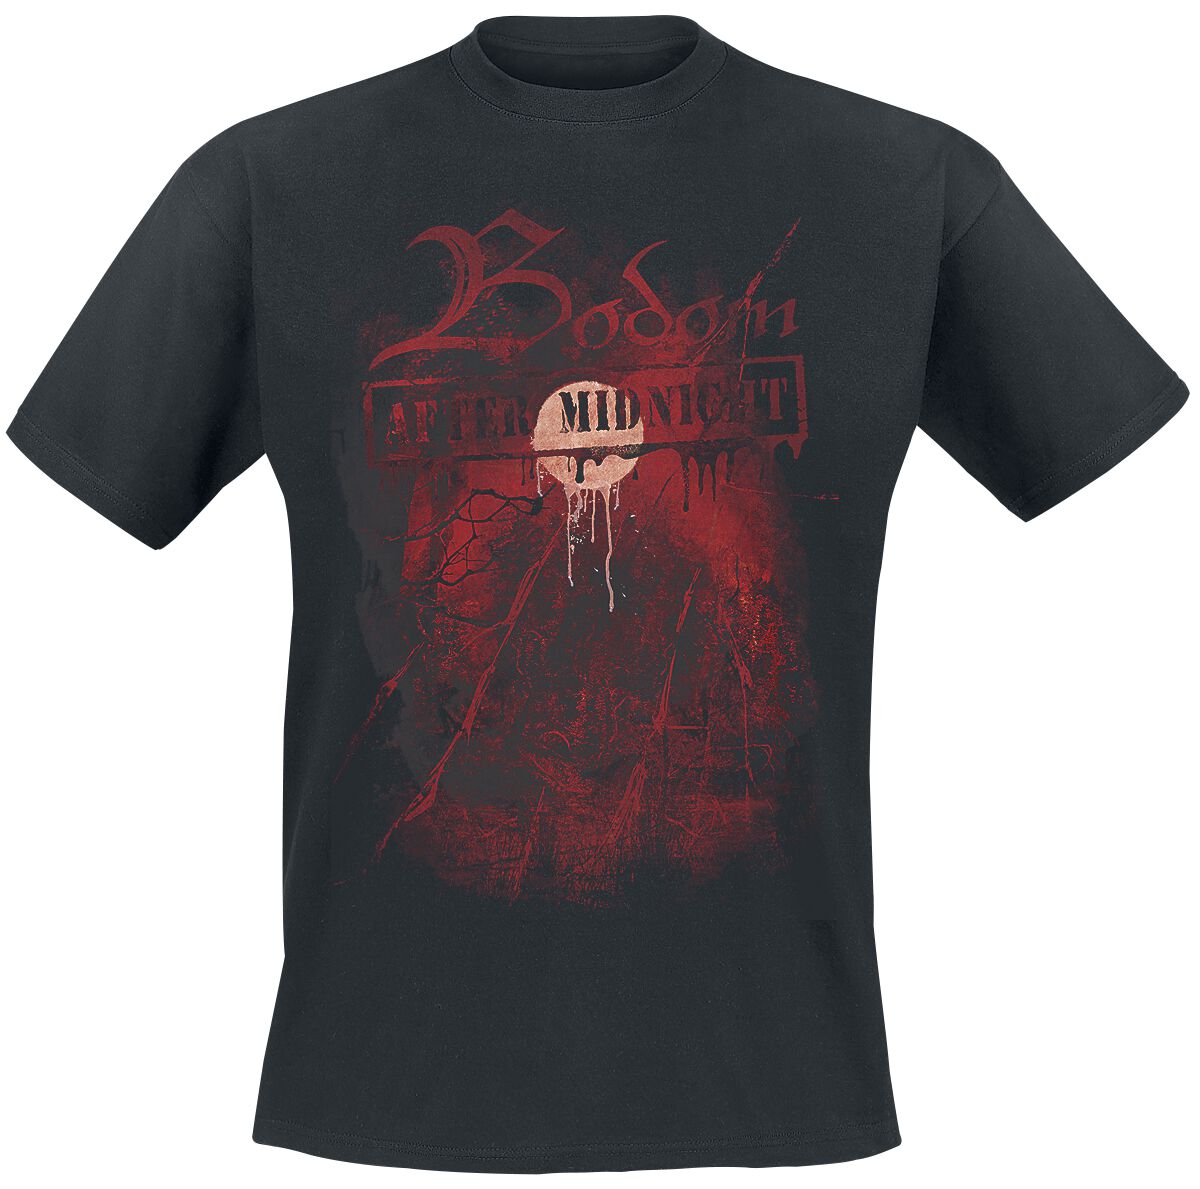 Image of Bodom After Midnight Bodom After Midnight T-Shirt schwarz